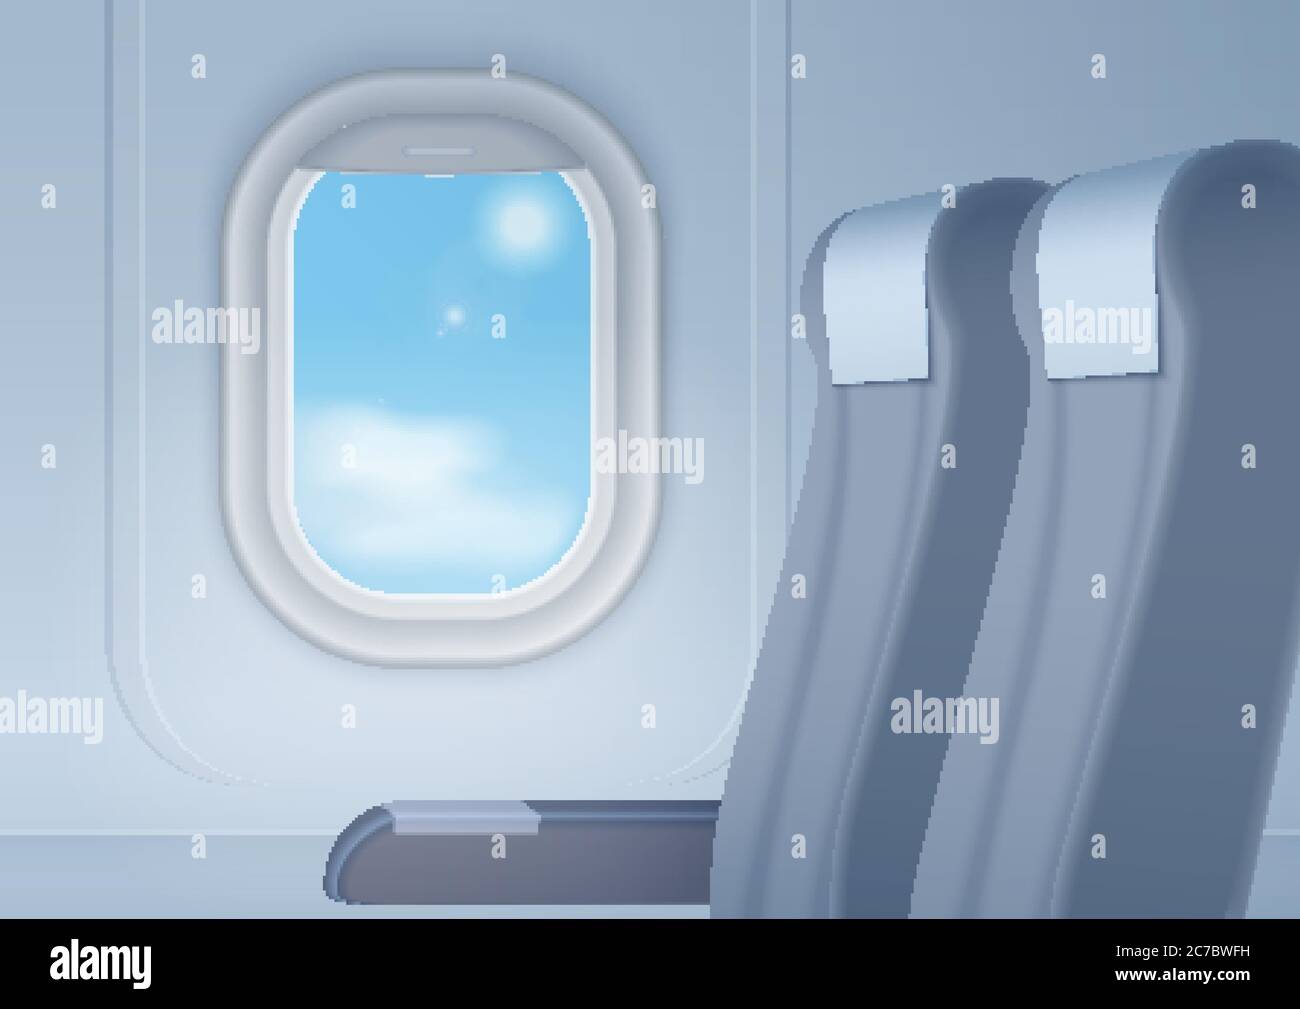 Aircraft interior with realistic smooth window and seats vector illustration Stock Vector